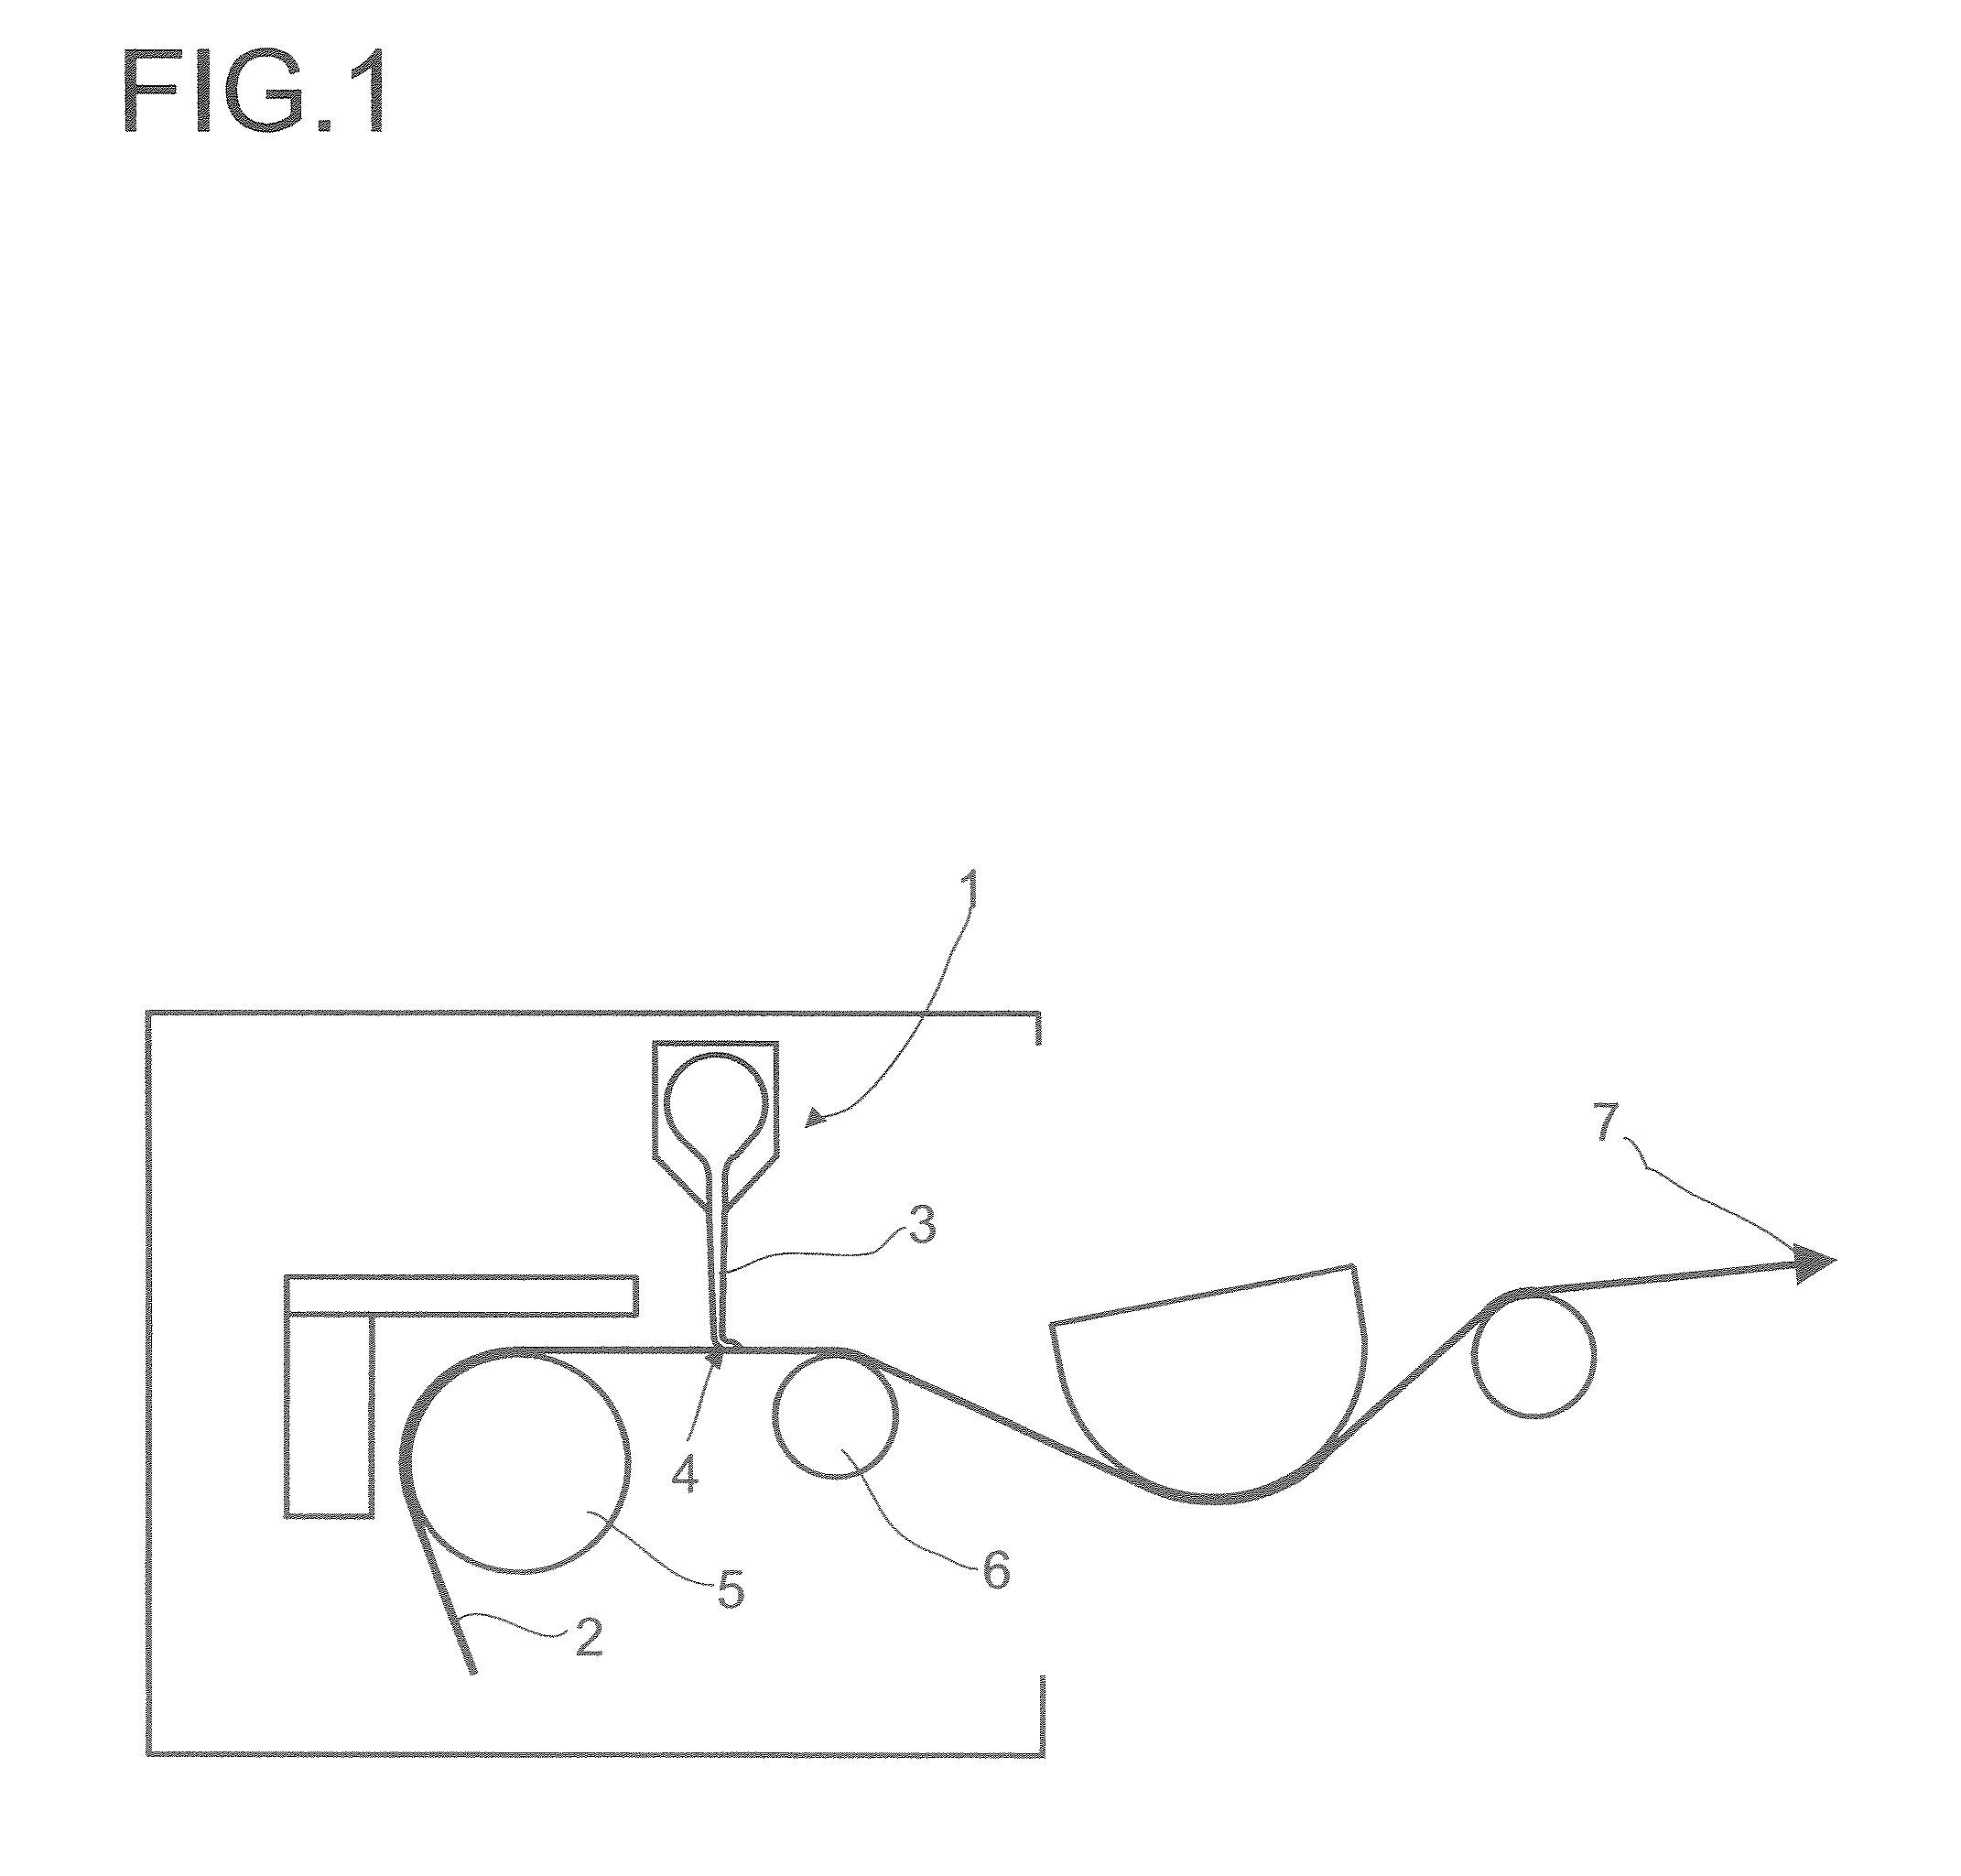 Method for the Production of Single-and/or Multiple-Coated Substrates